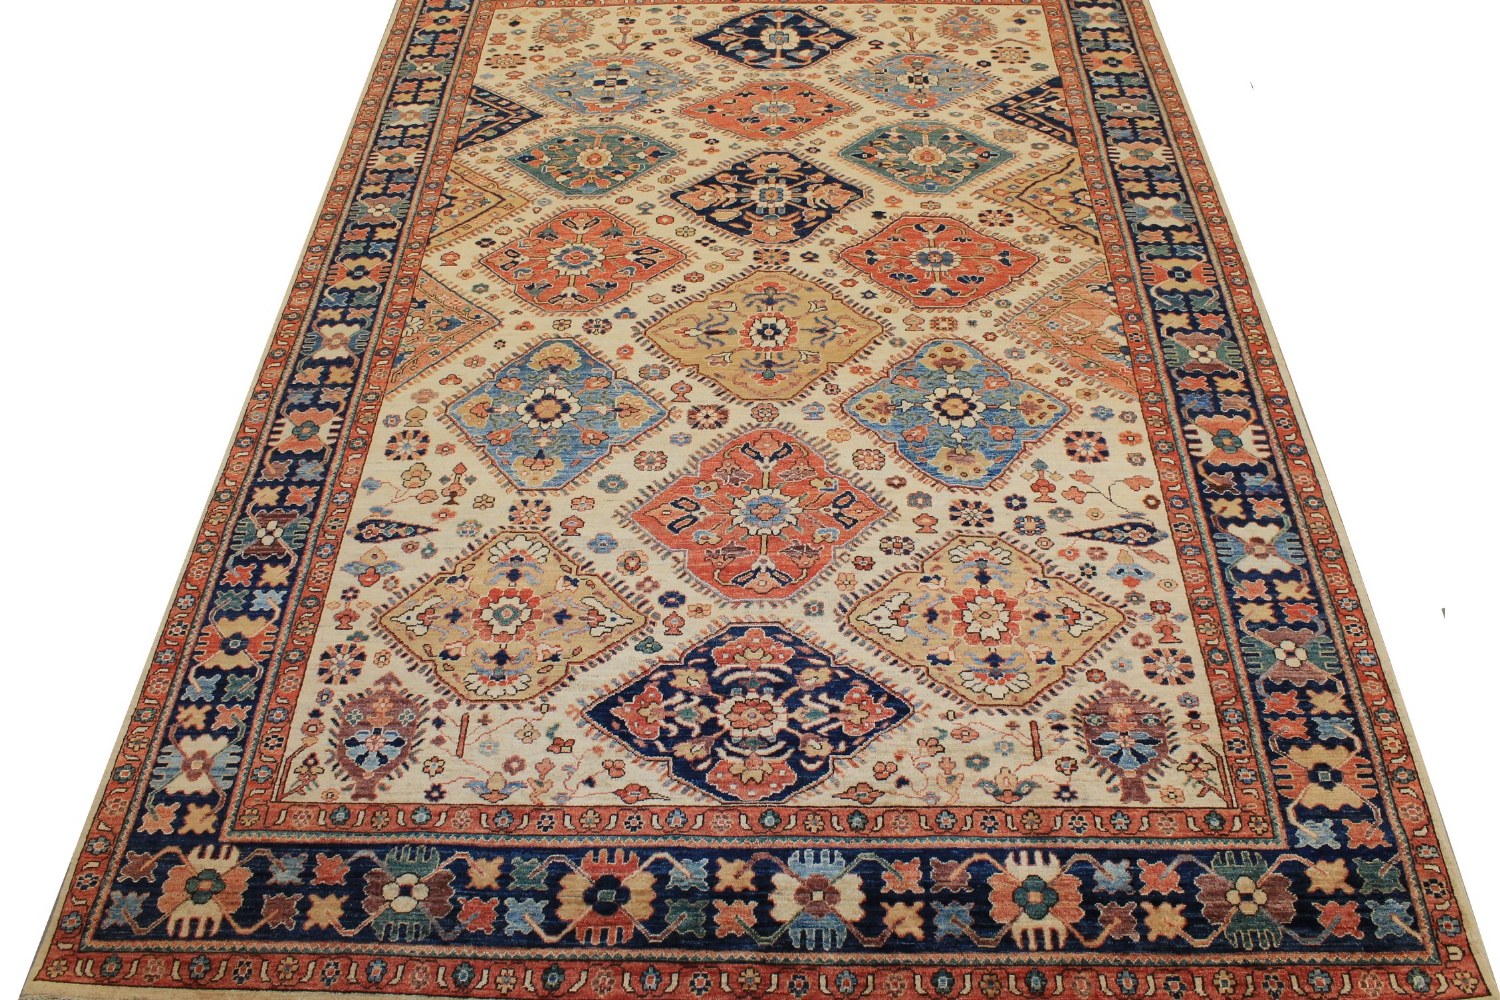 8x10 Aryana & Antique Revivals Hand Knotted Wool Area Rug - MR027258